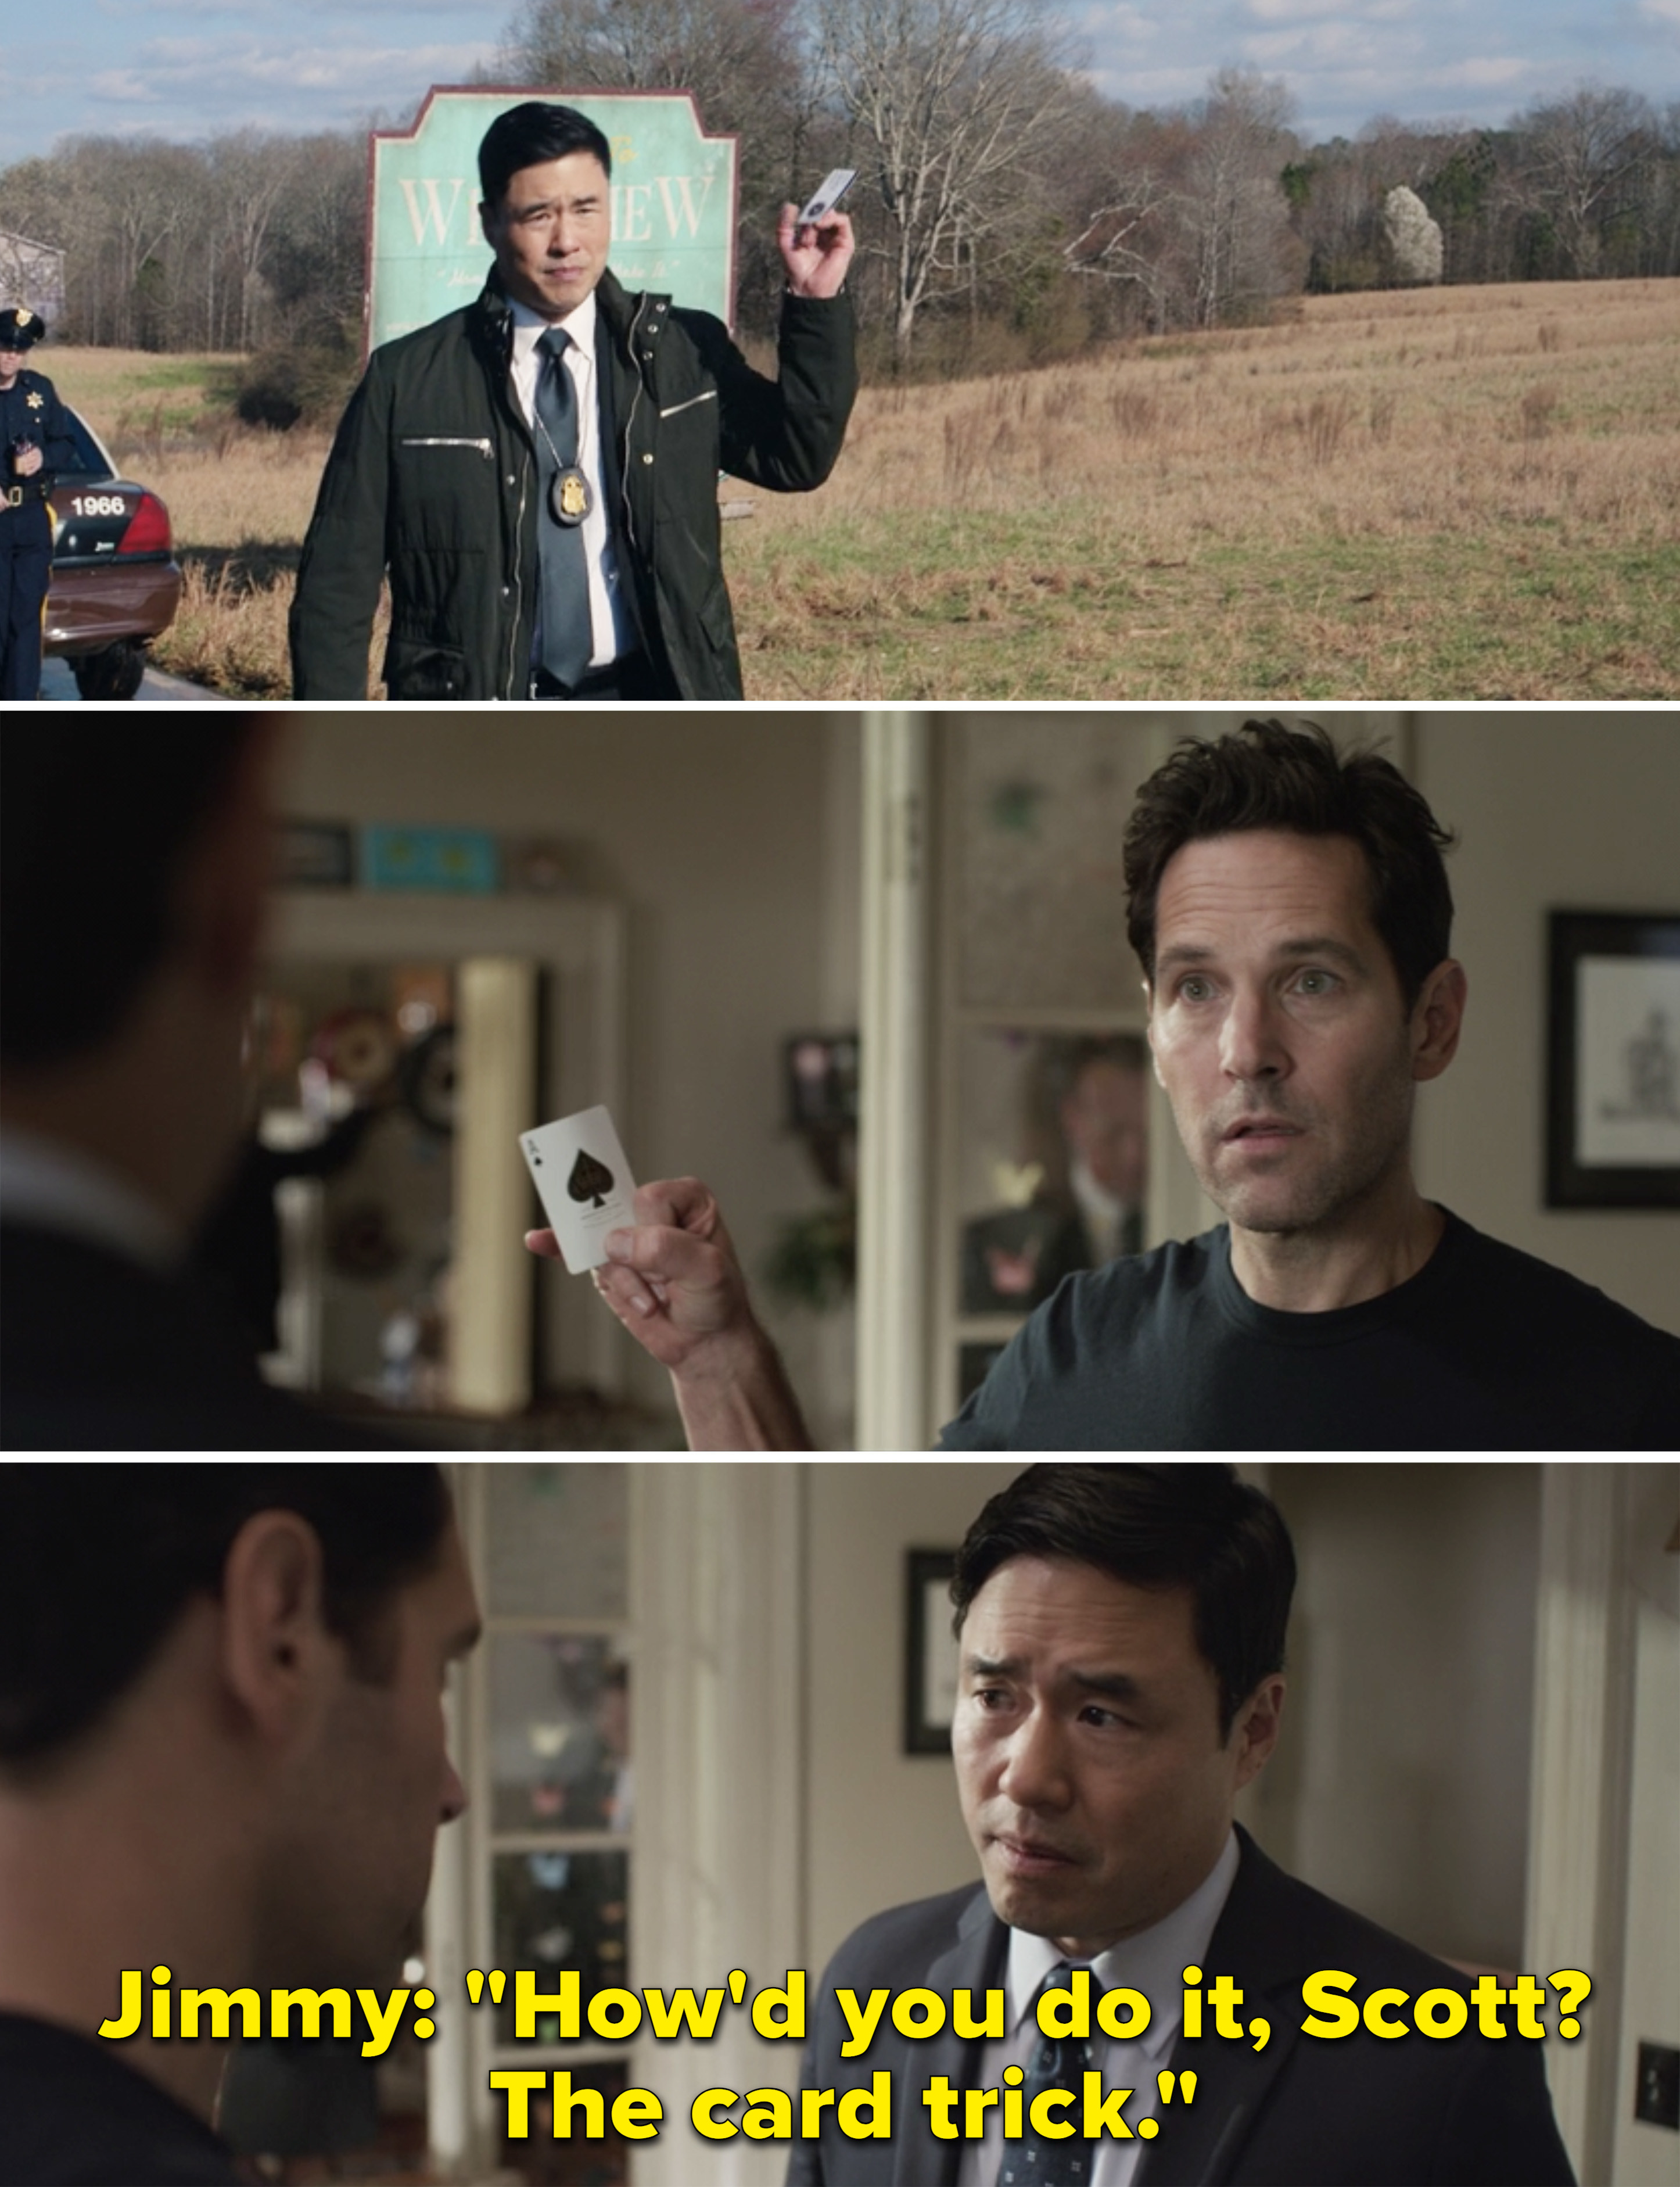 Jimmy doing his card trick with his business card vs. Scott doing a card trick in &quot;Ant-Man and the Wasp&quot; and Jimmy saying, &quot;How&#x27;d you do it, Scott? The card trick&quot;